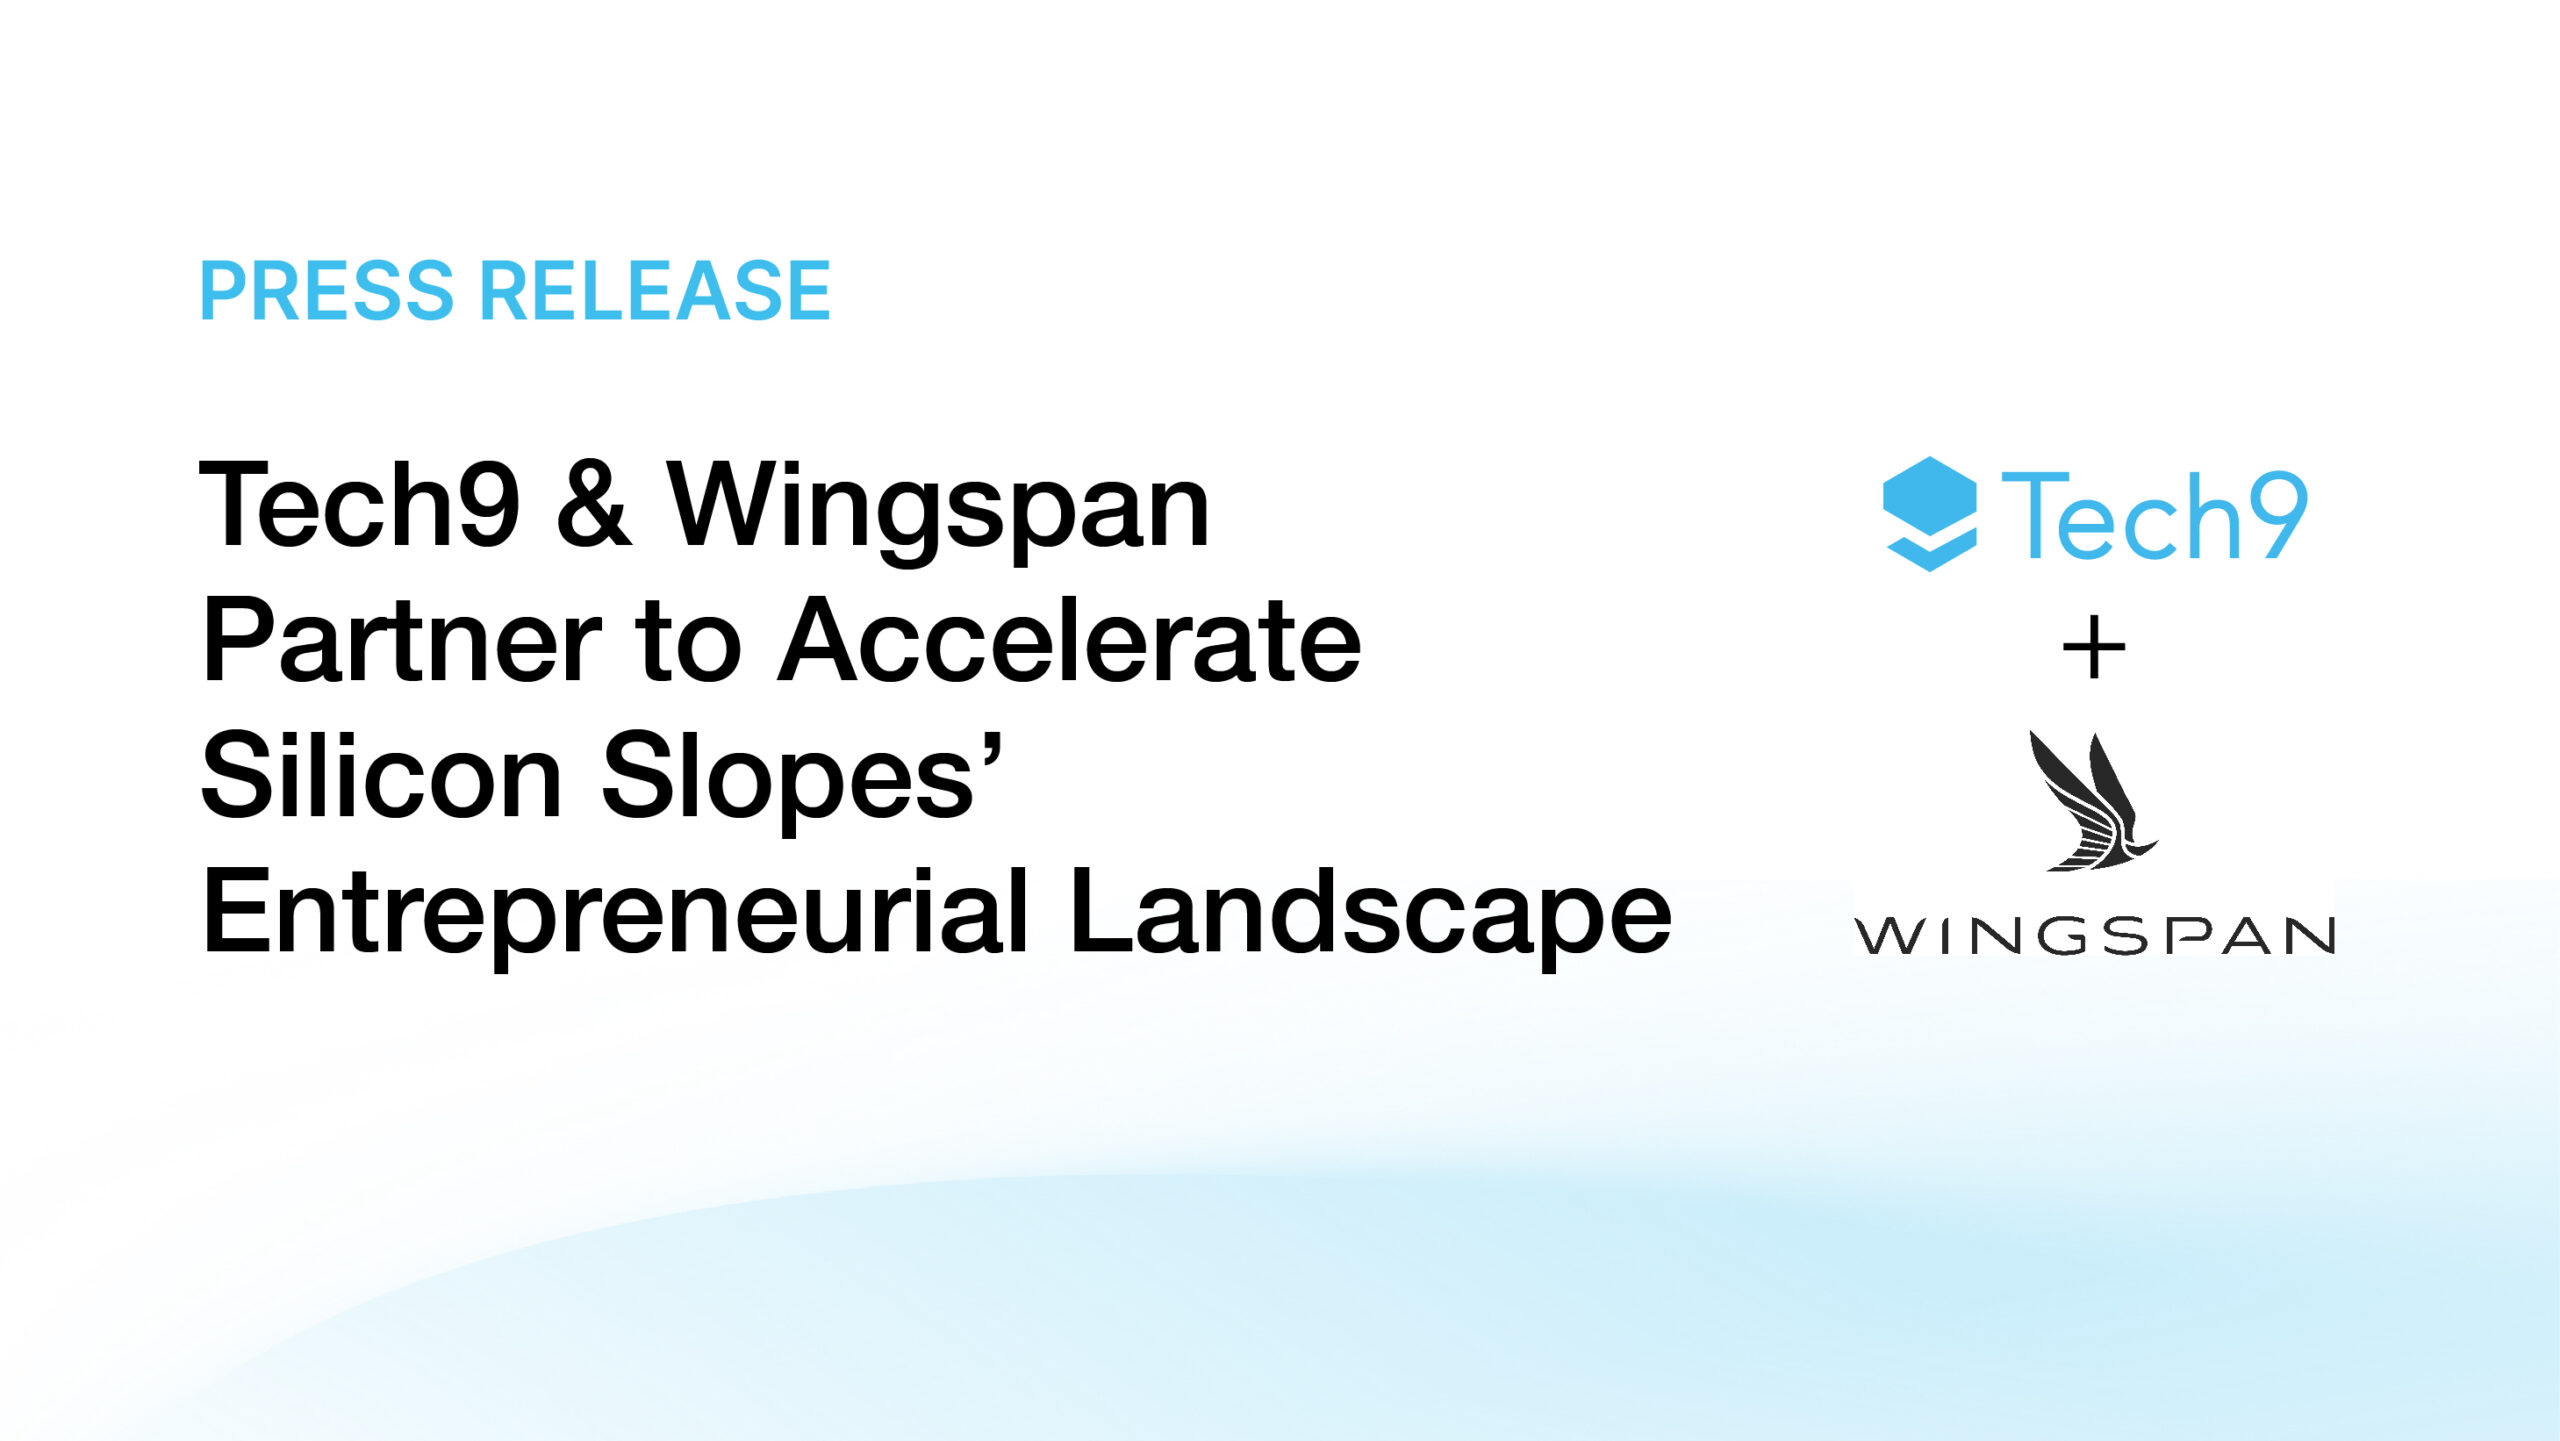 Wingspan and Tech9 Partner to Accelerate Silicon Slopes' Entrepreneurial Landscape